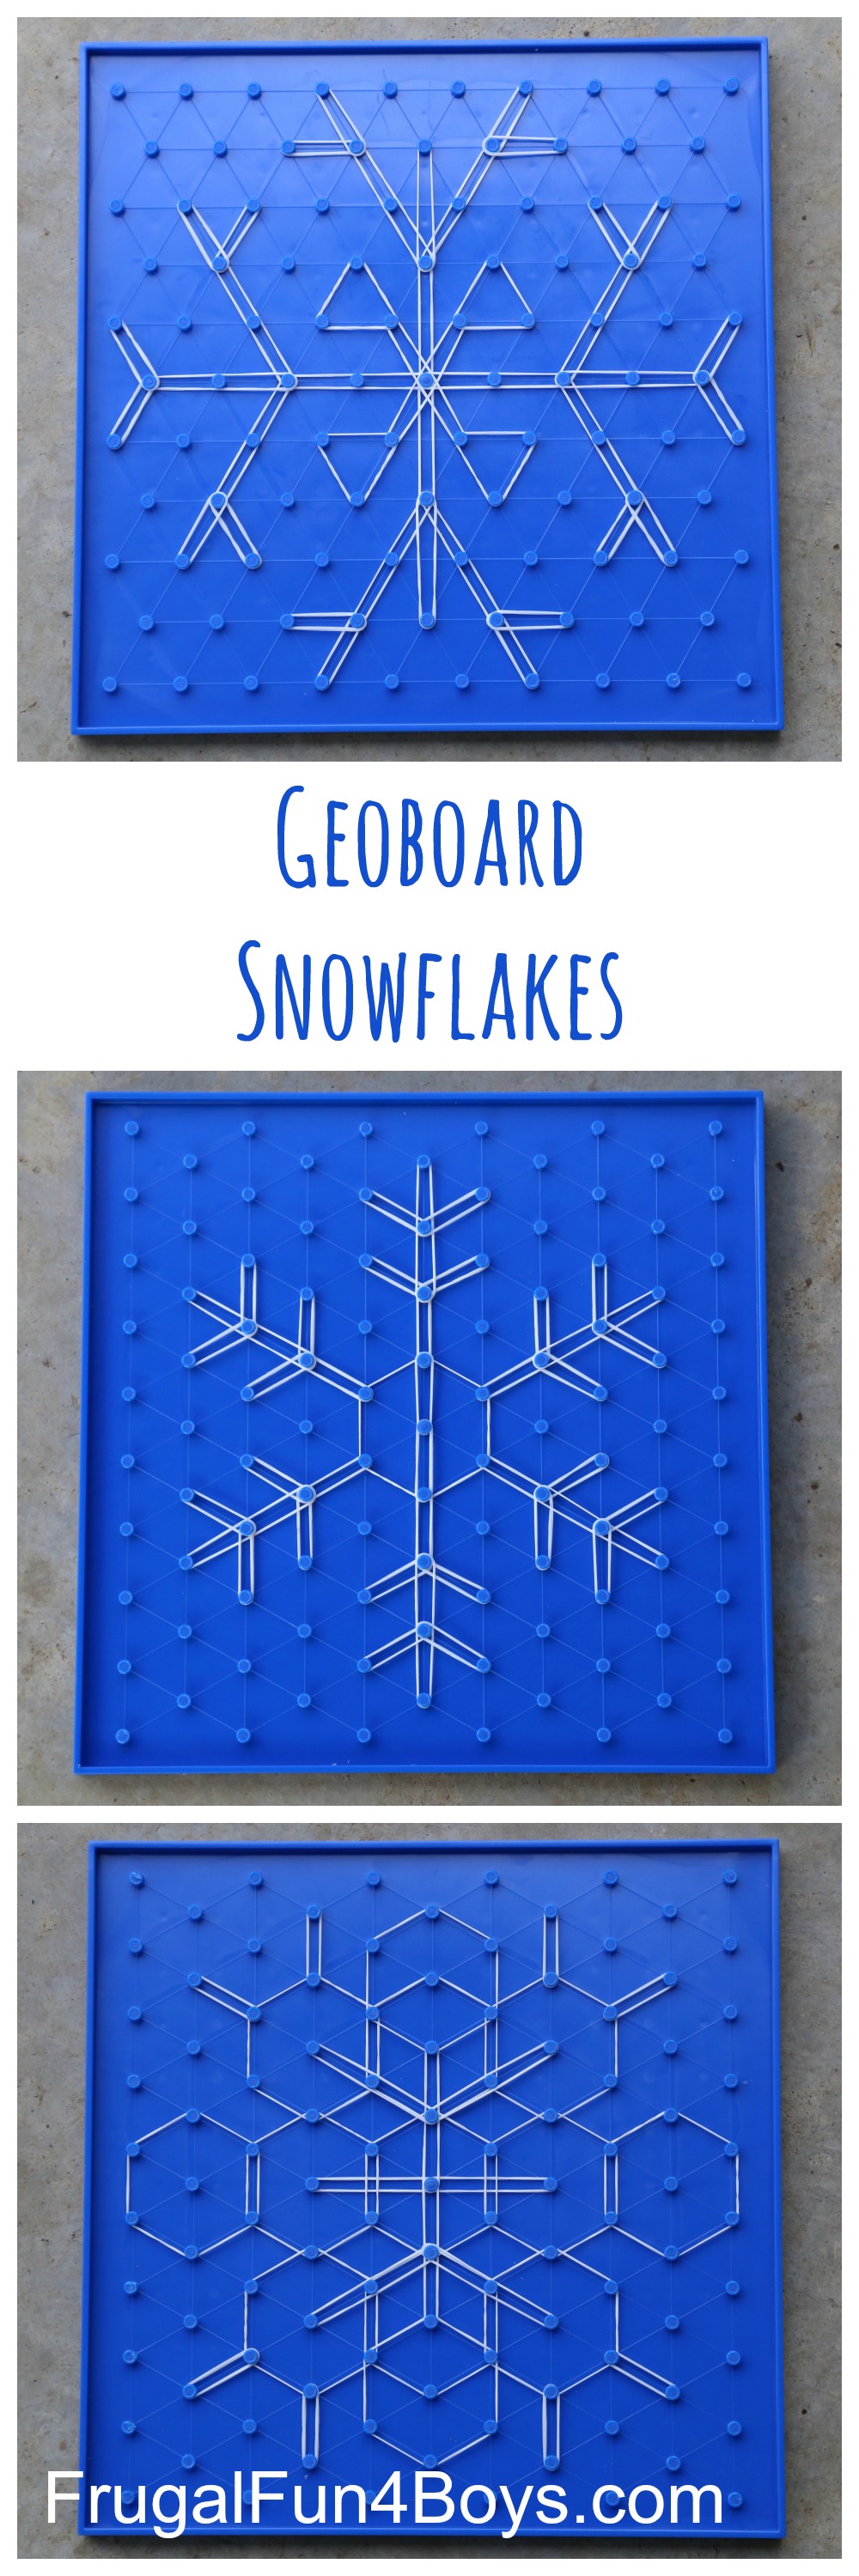 Geoboard Snowflakes - Winter STEM Activity for Kids